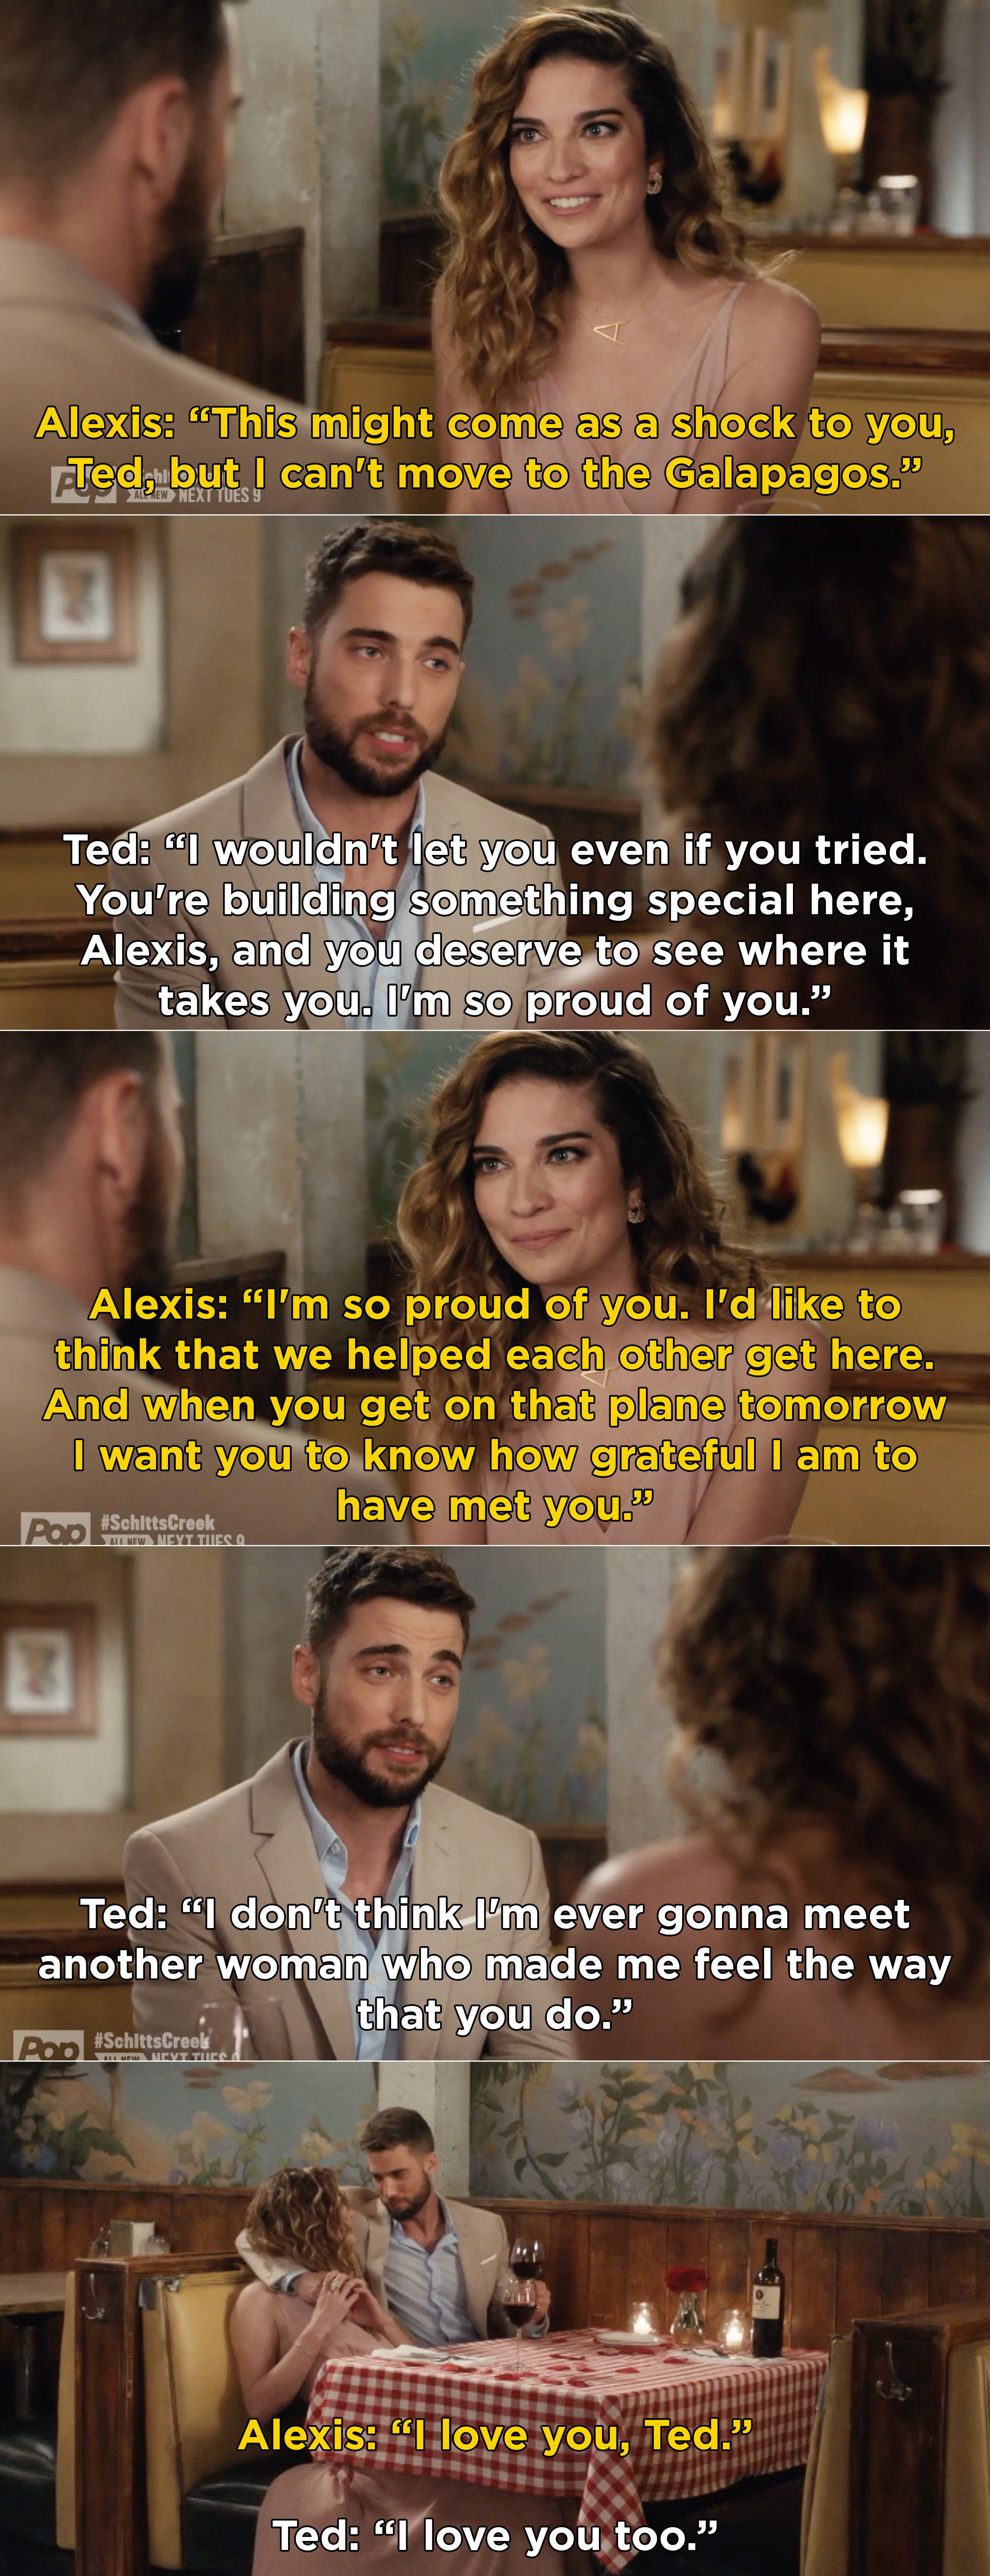 Alexis and Ted saying that they are proud of each other